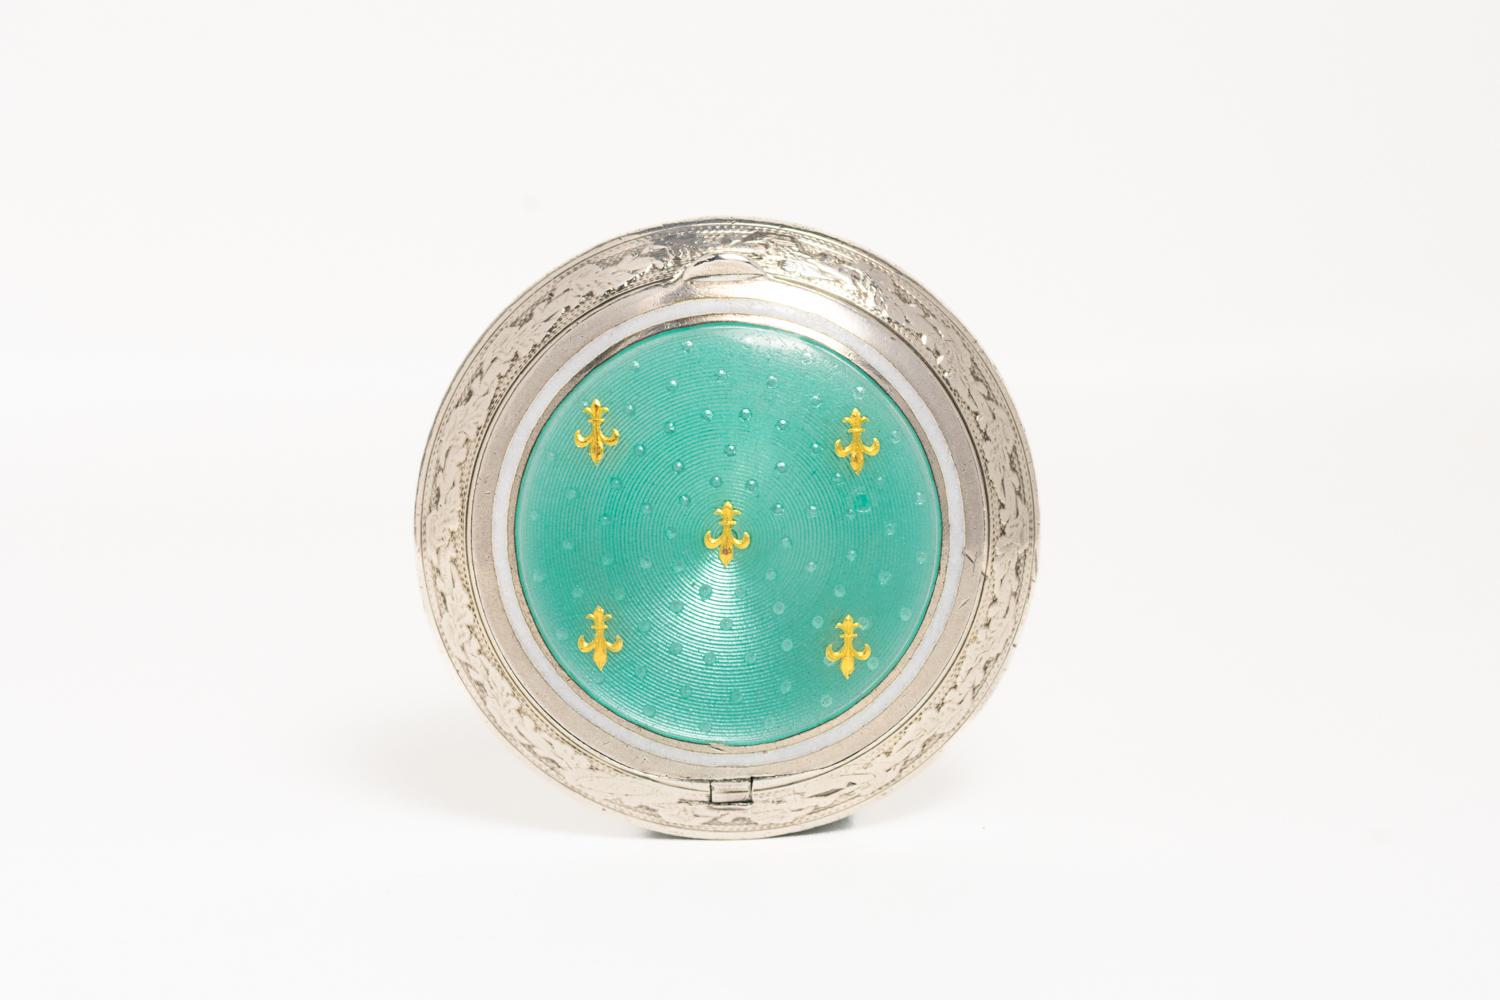 This rare Edwardian light blue silver guilloche enamel compact is dated for 1907 and it was made in France. This extraordinary piece is decorated with striking light blue guilloche enamel and gold 'Fleur de Lis' motif. 'Fleur de Lis' is a French